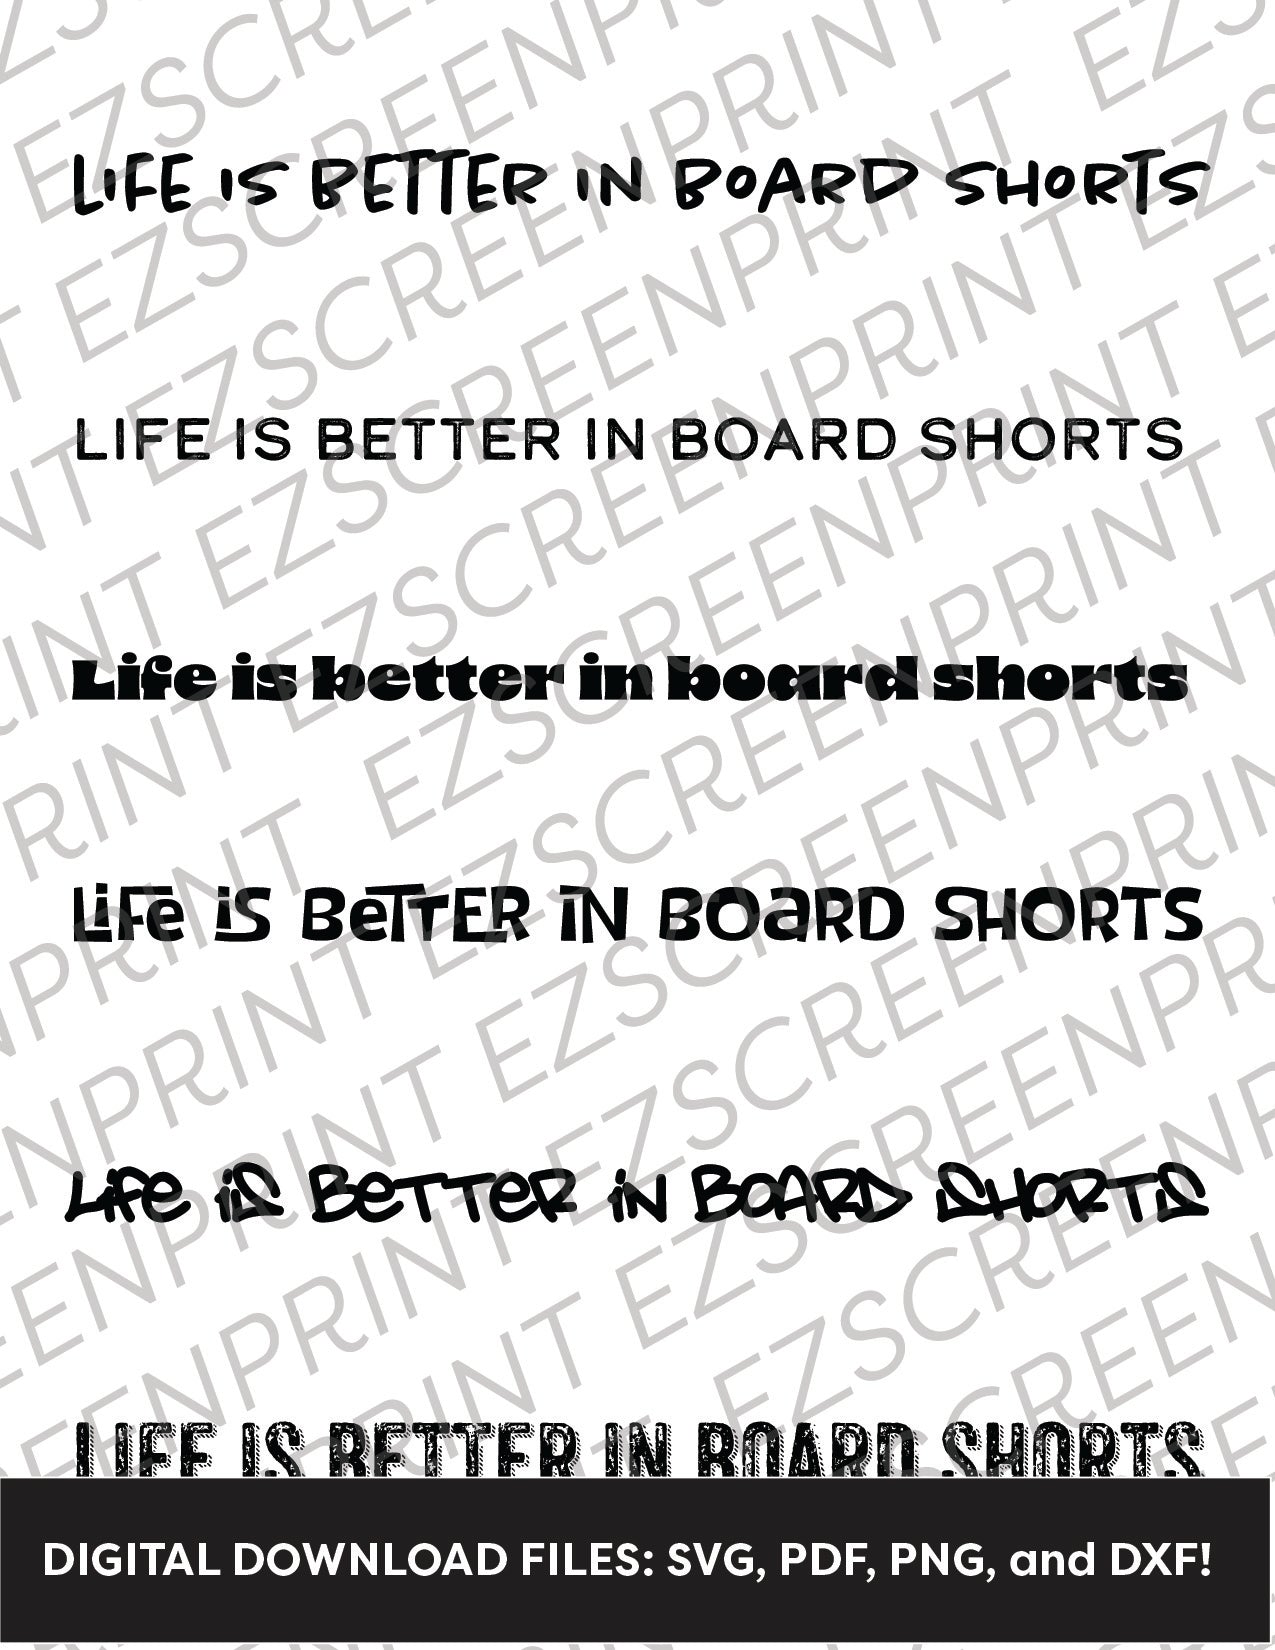 Life is Better in Board Shorts Phrase Pack, Various Sizes + Digital Download